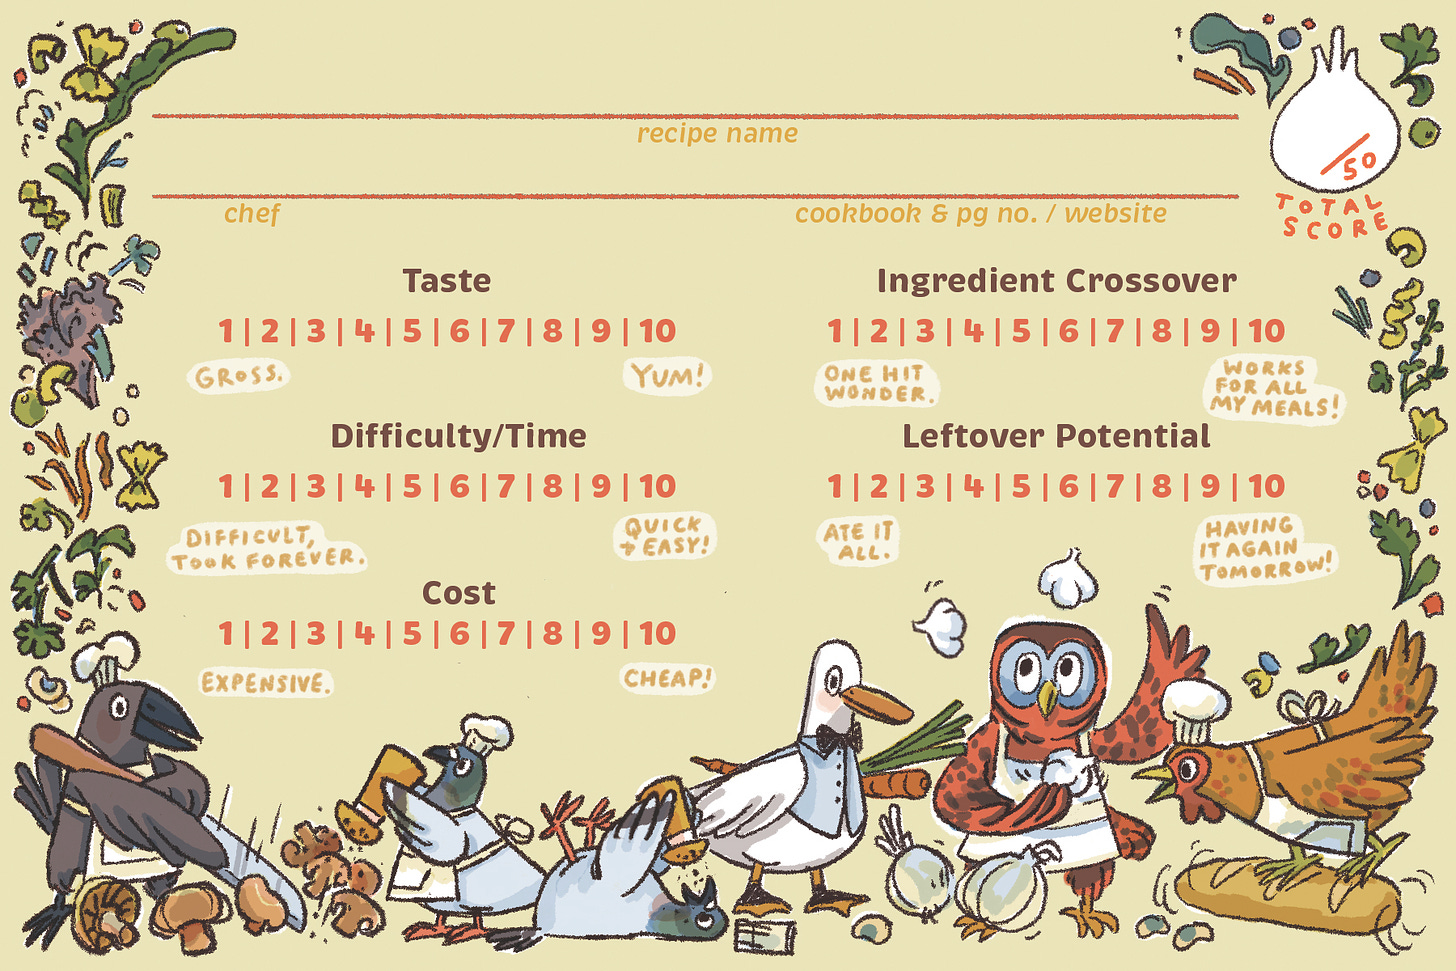 the kayla stark recipe rubric with my neutral bird illustration in a cooking theme